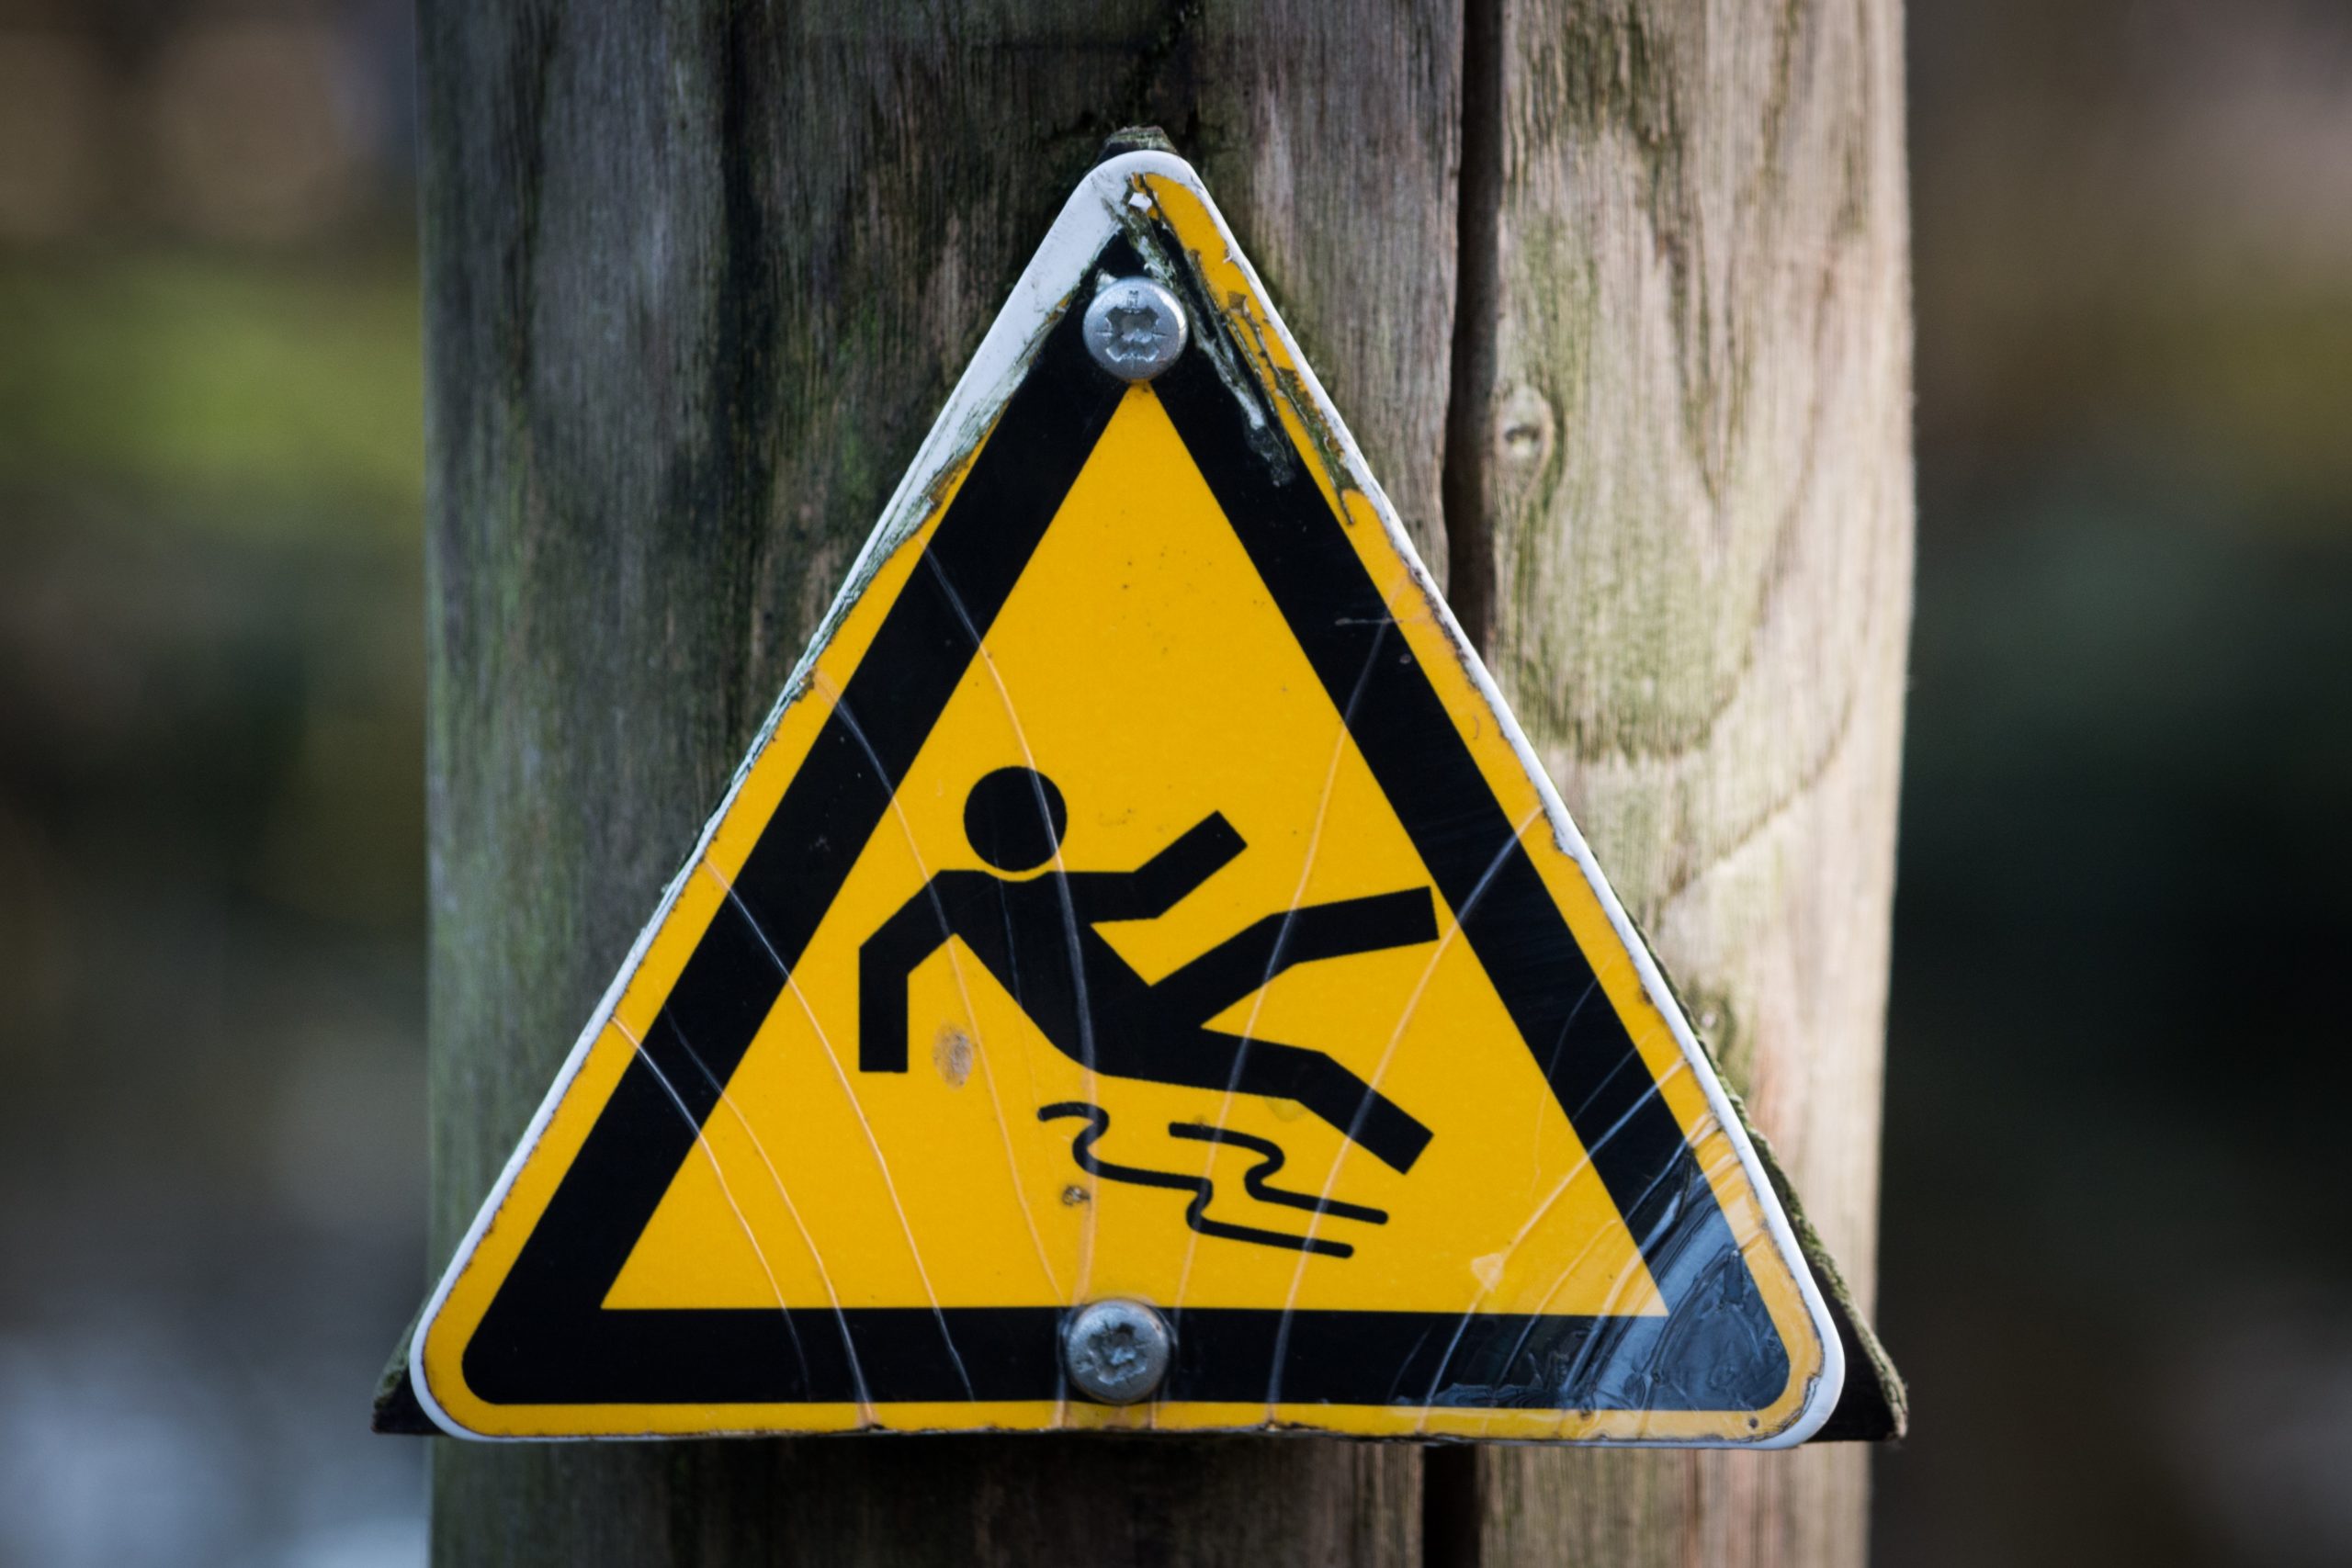 How To Prevent Slip And Falls In The Winter